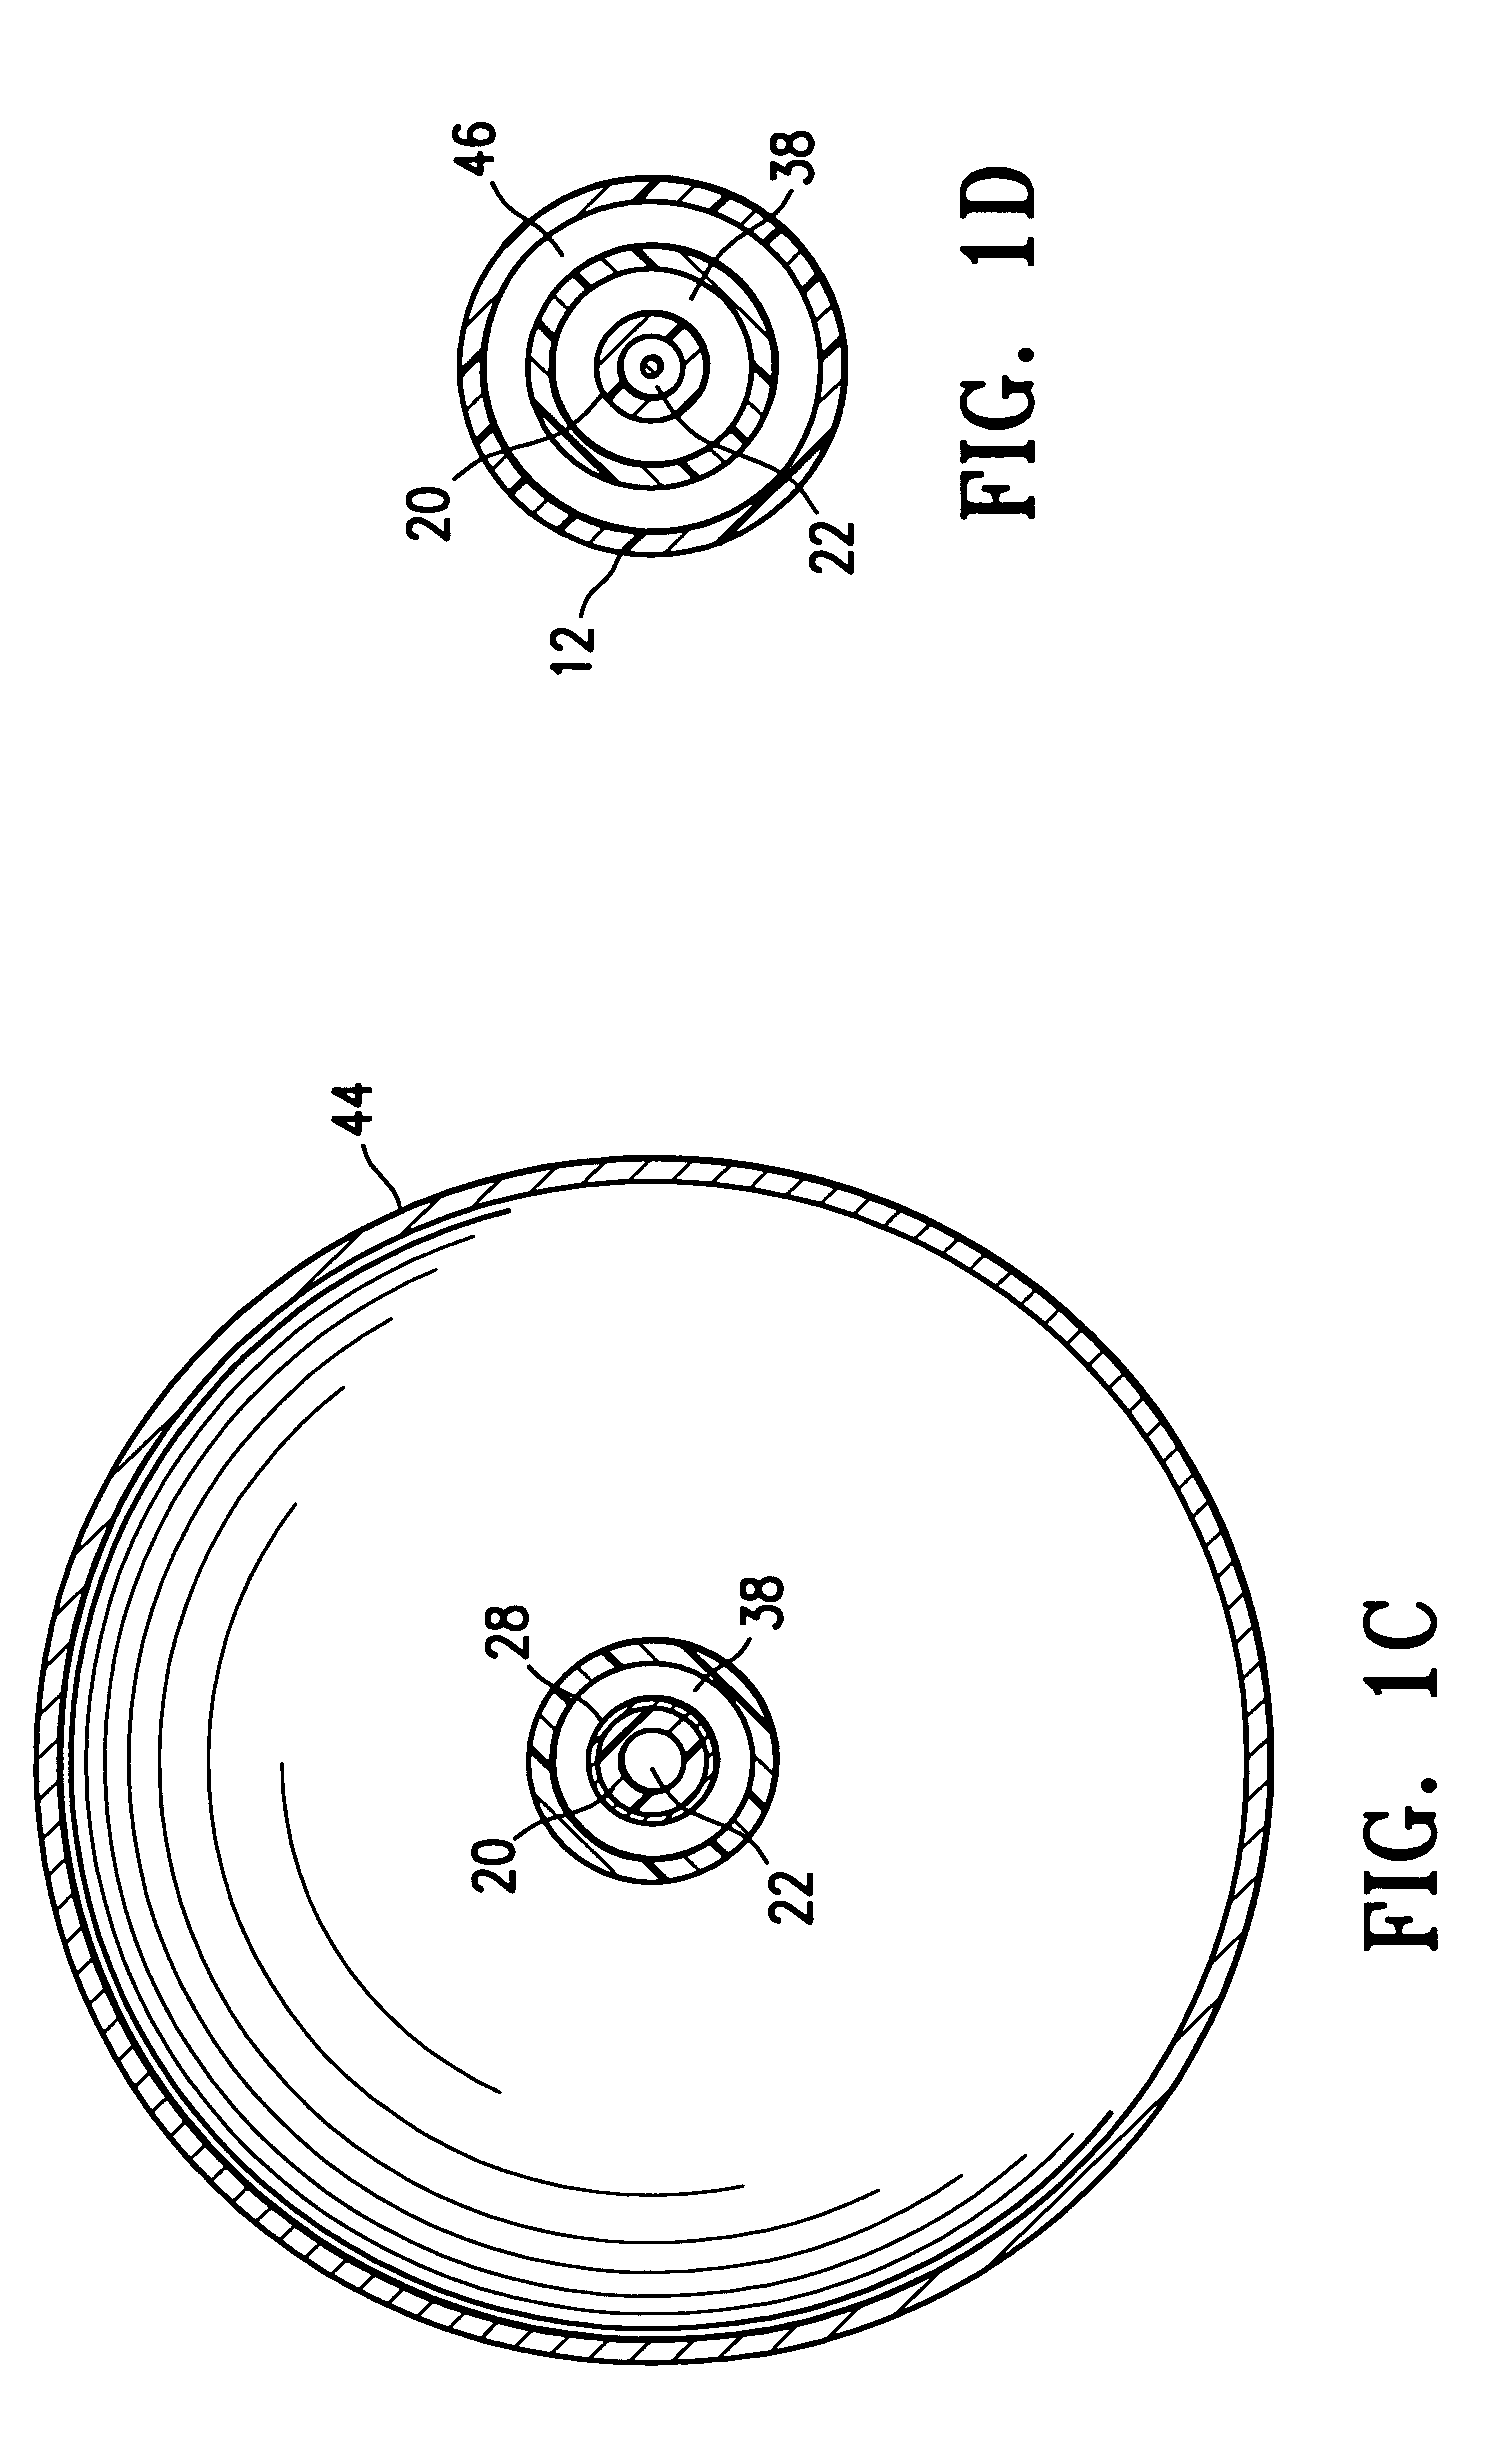 Methods for tissue irradiation with shielding